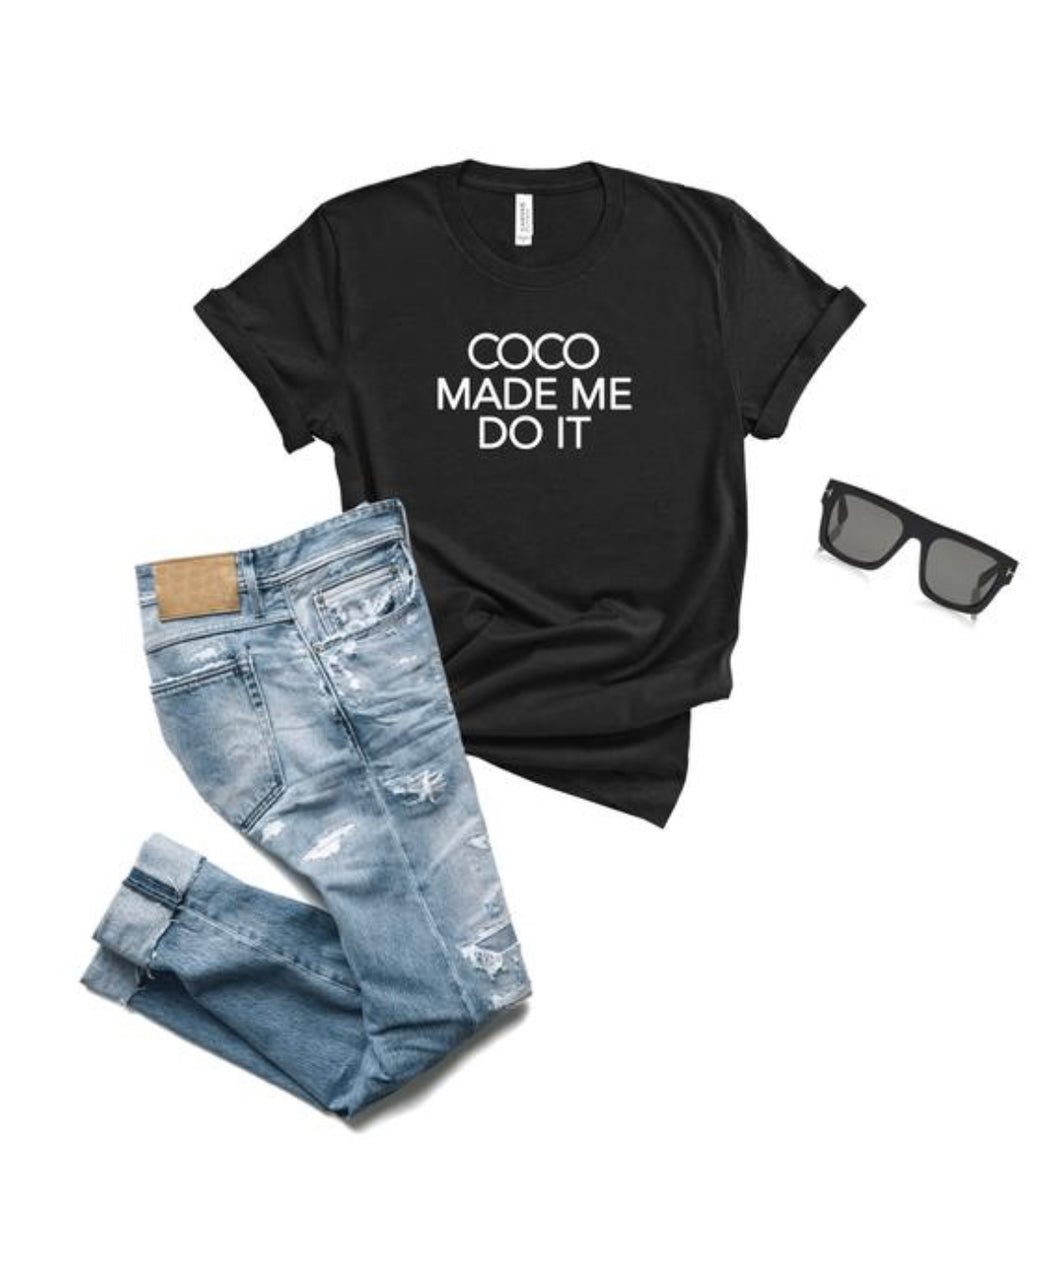 Coco Made Me Do It T-shirt